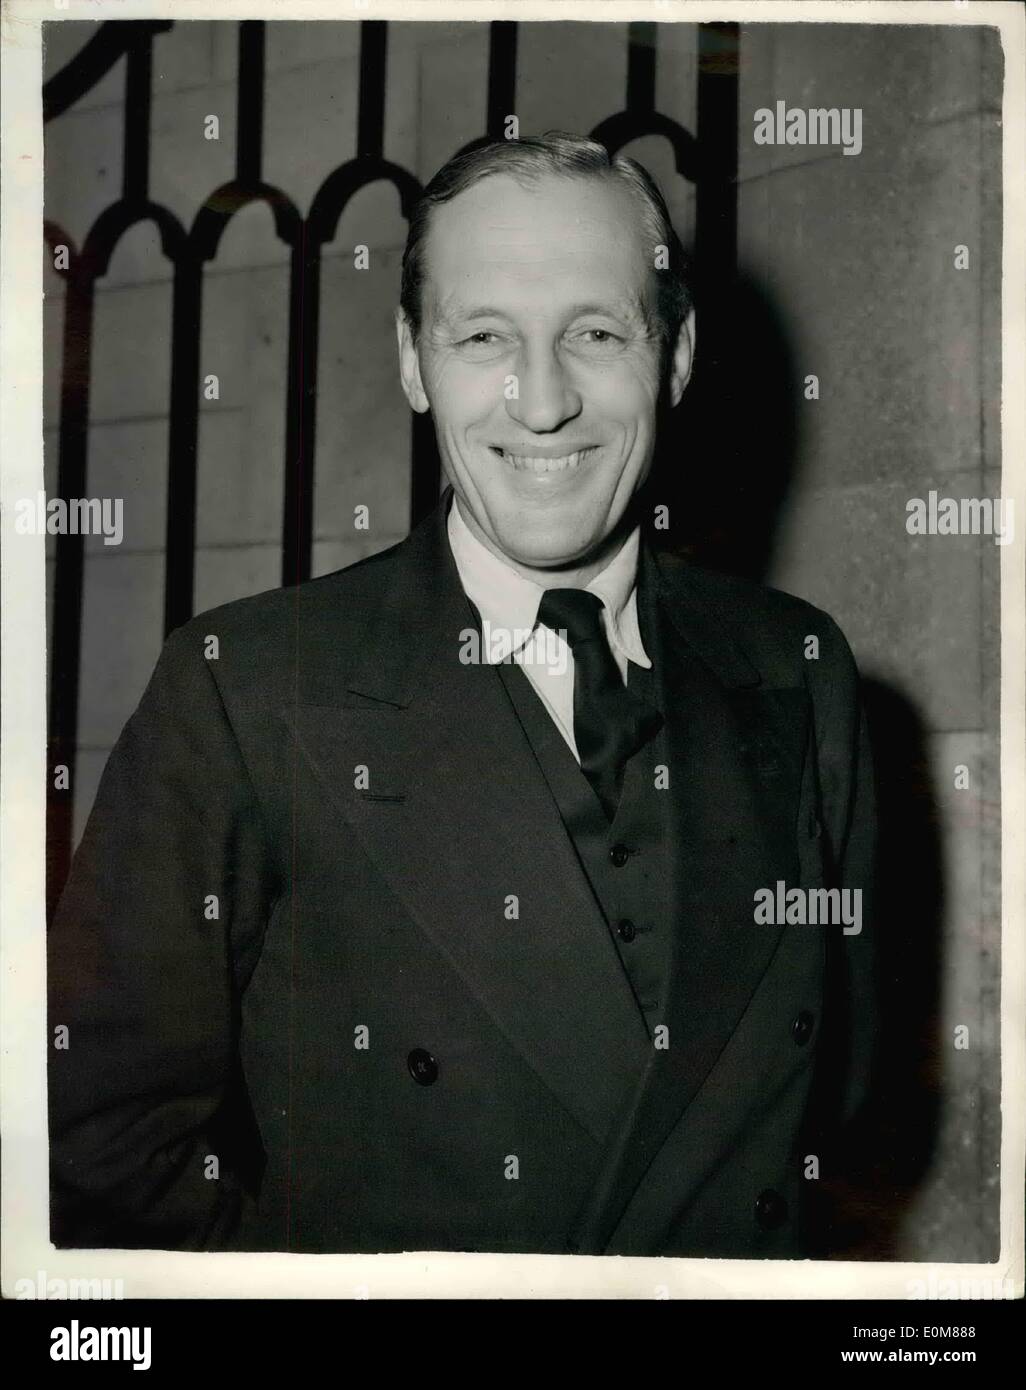 Dec. 12, 1953 - Sir Evelyn Baring at the colonial office. Sir Evelyn Baring, governor of Kenya, who arrived in London today, this afternoon went to the colonial office to see Mr. Lyttelton, the colonial secretary. Photo shows Sir Evelyn Baring, seen outside the colonial office today. Stock Photo